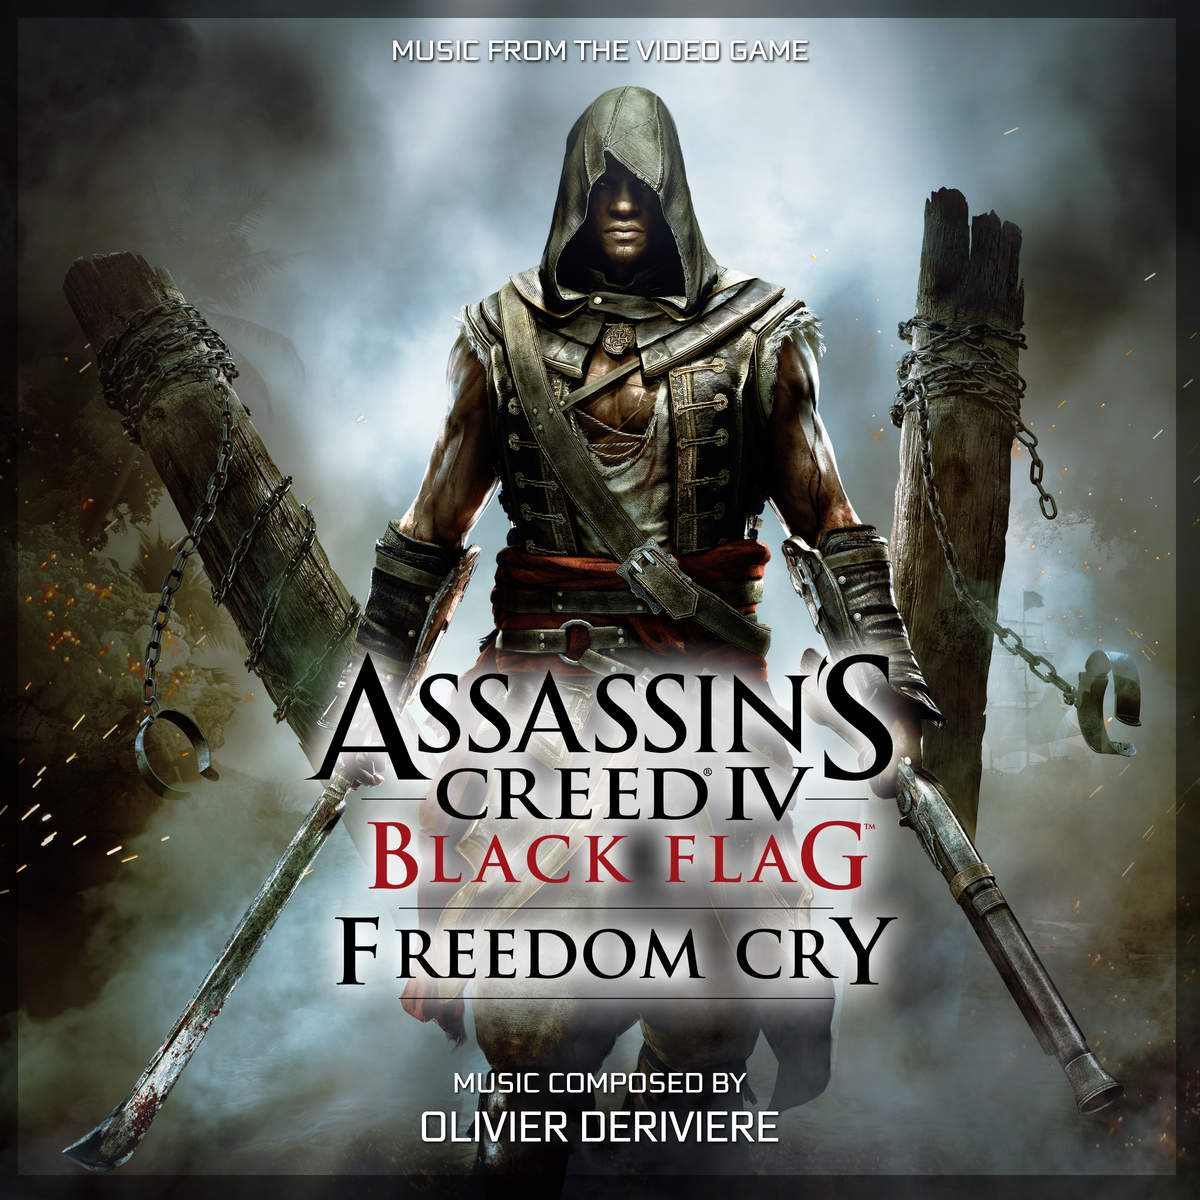 Assassins_Creed_4_Black_Flag_Freedom_Cry_Music_from_the_Video_Game__cover1200x1200.jpeg